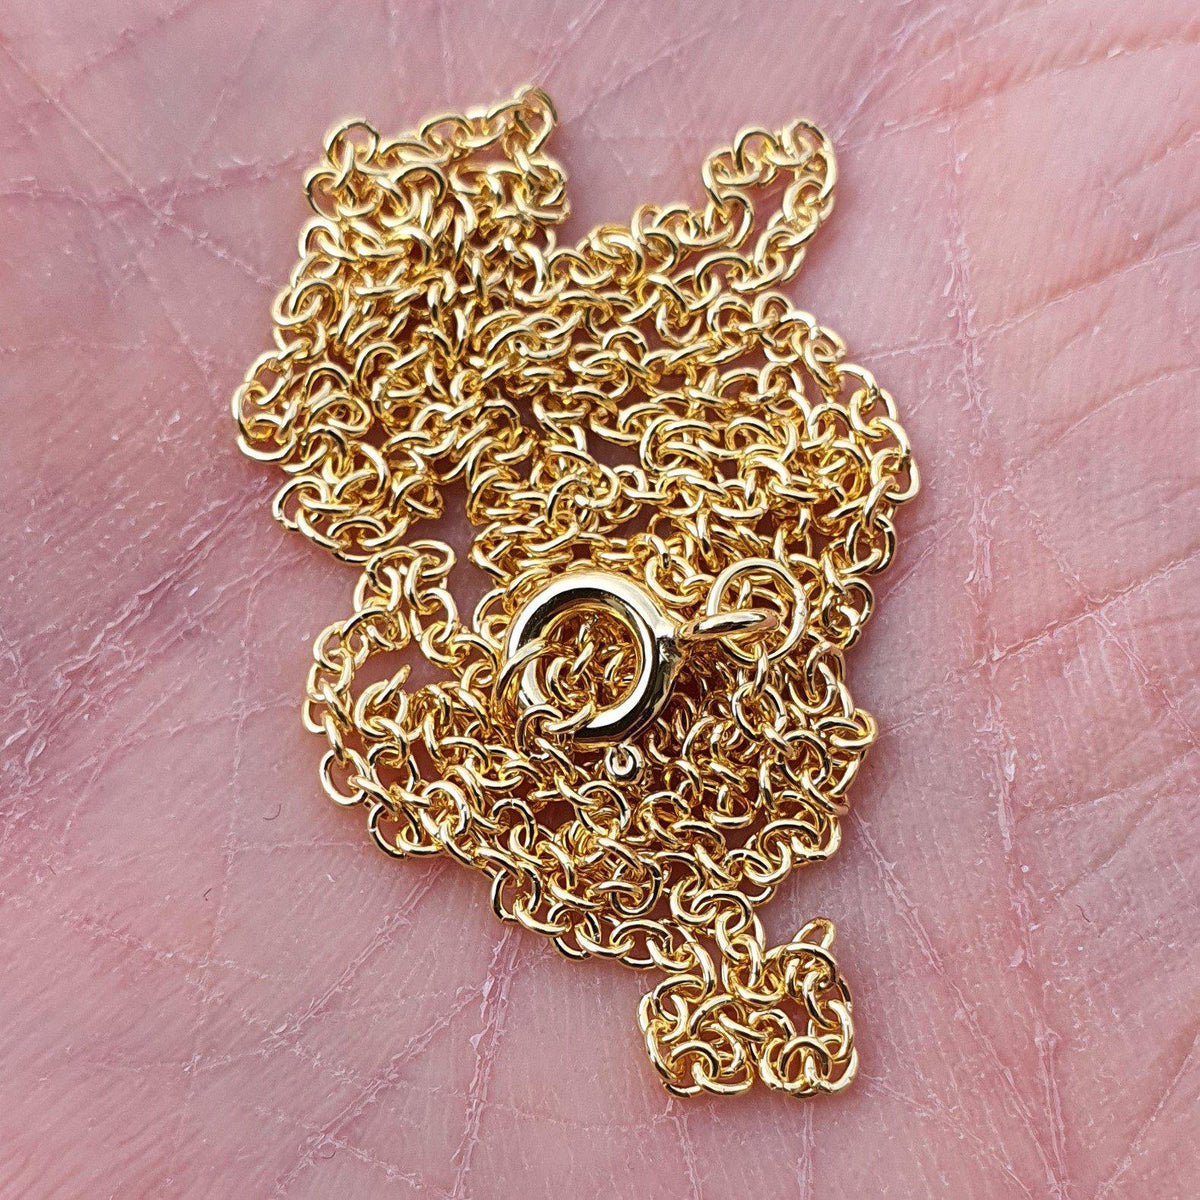 Yellow Gold-Filled Cable Chain